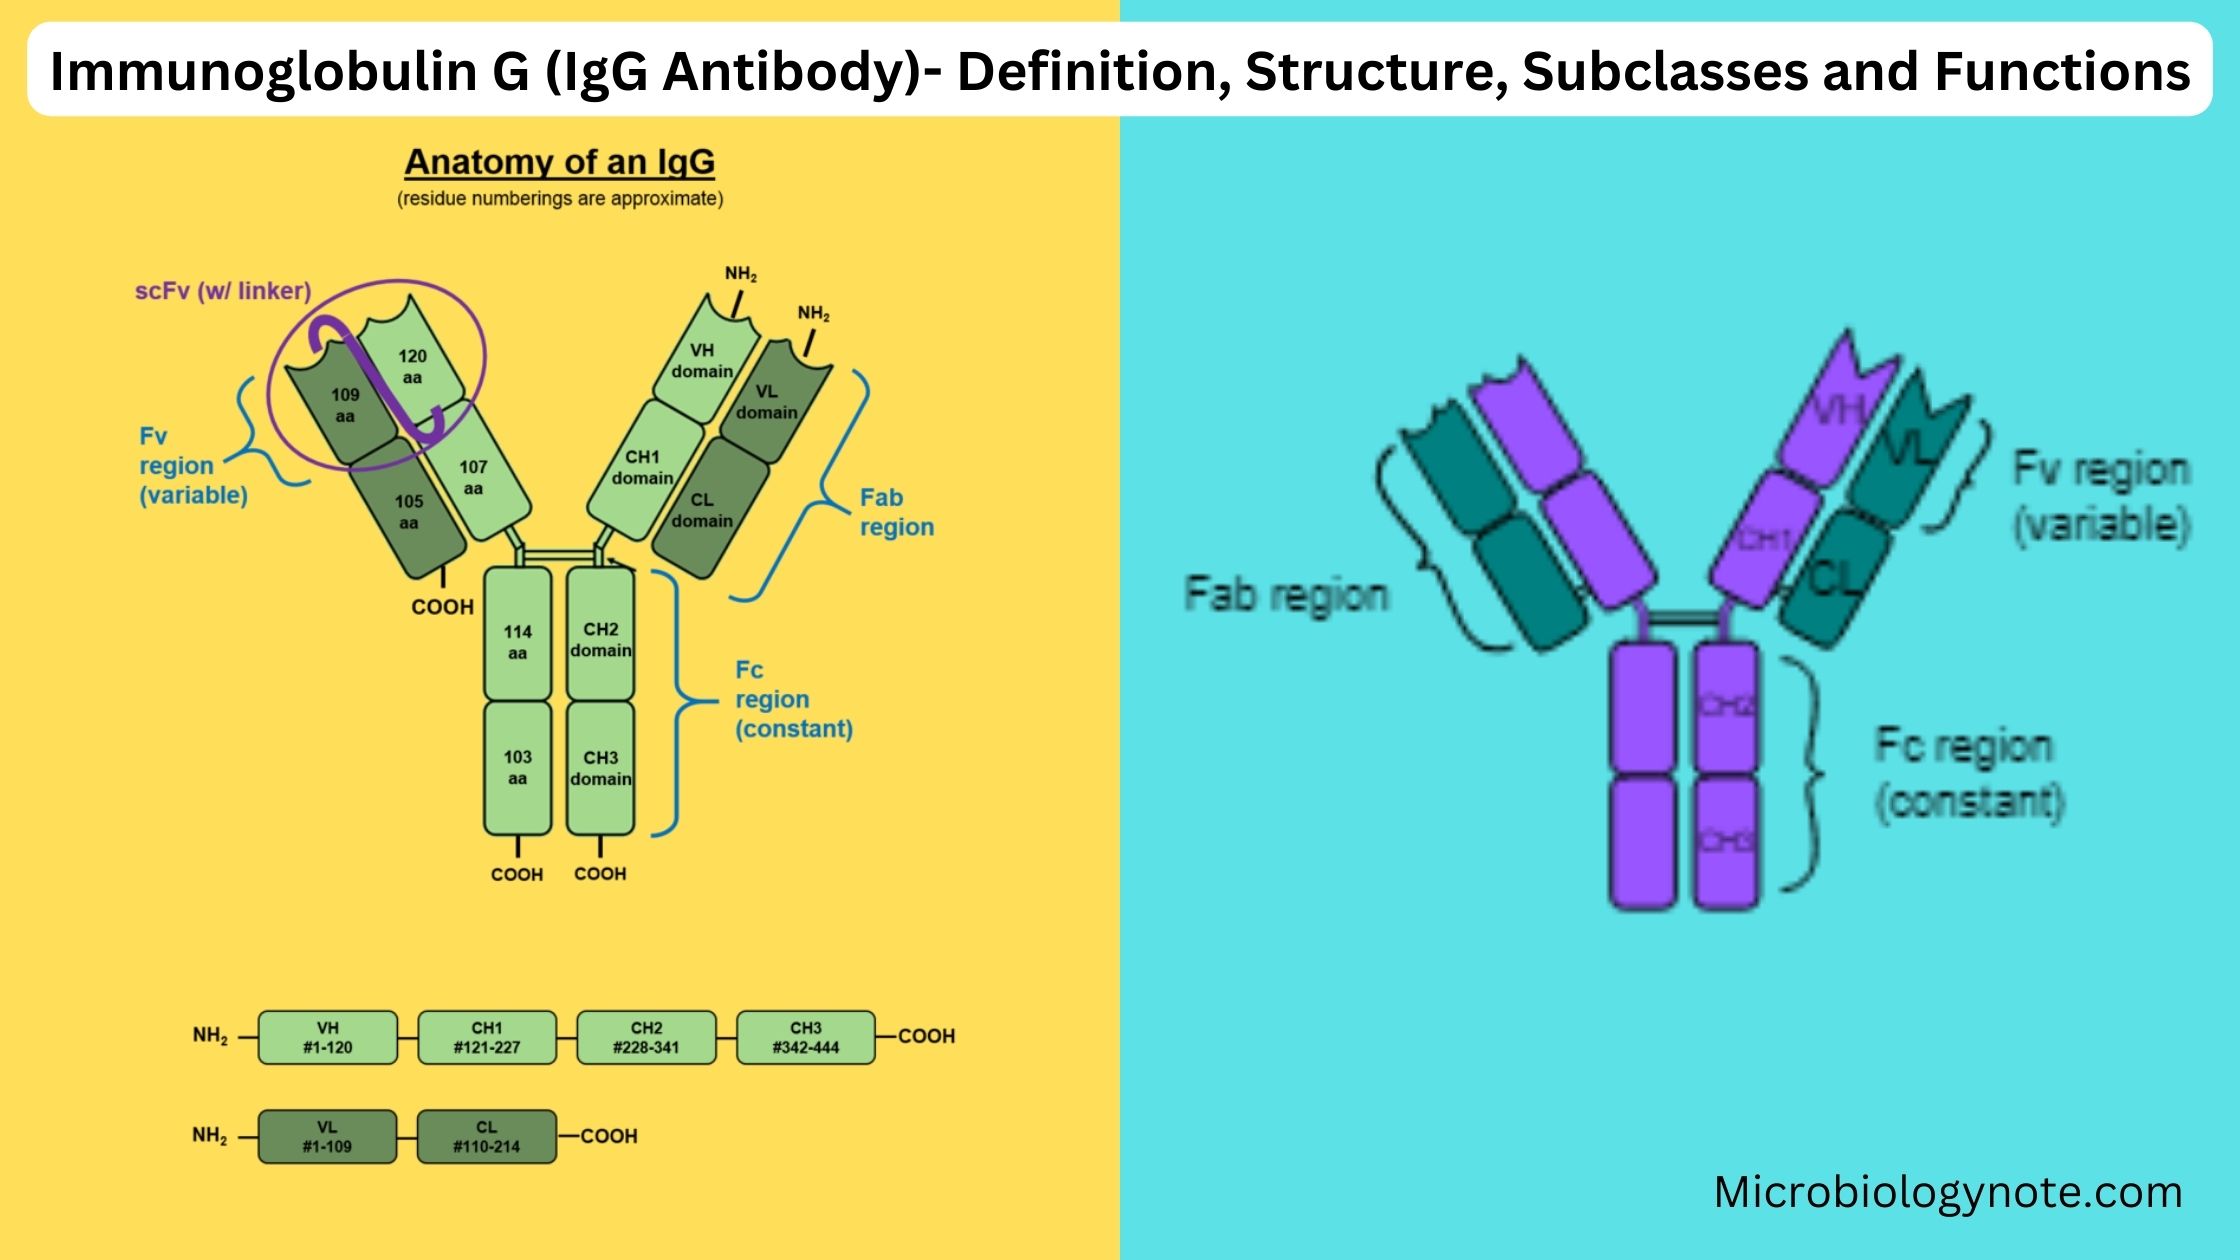 Immunoglobulin G (IgG Antibody)- Definition, Structure, Subclasses and Functions